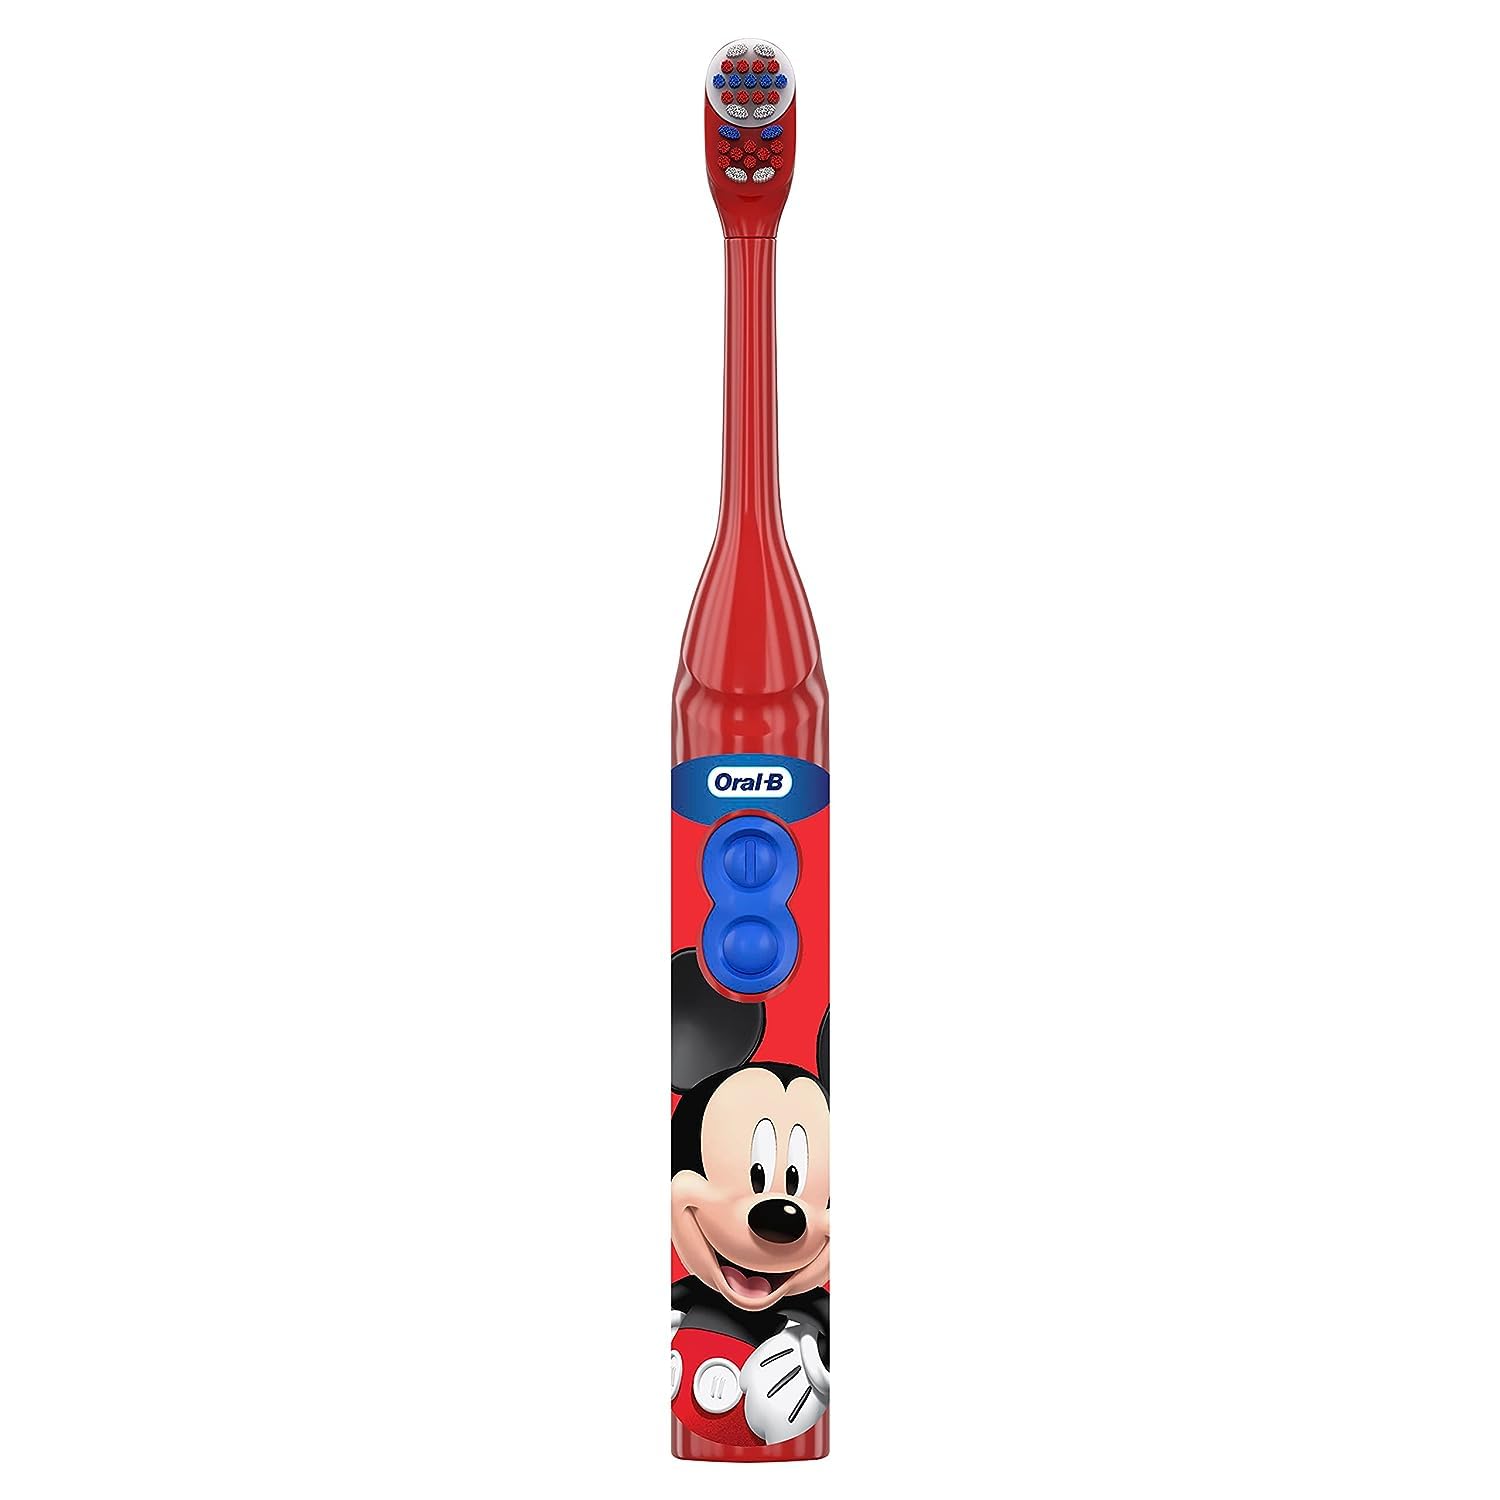 Oral-B Kid's Battery Toothbrush Featuring Disney's Mickey Mouse, Soft Bristles, for Kids 3+